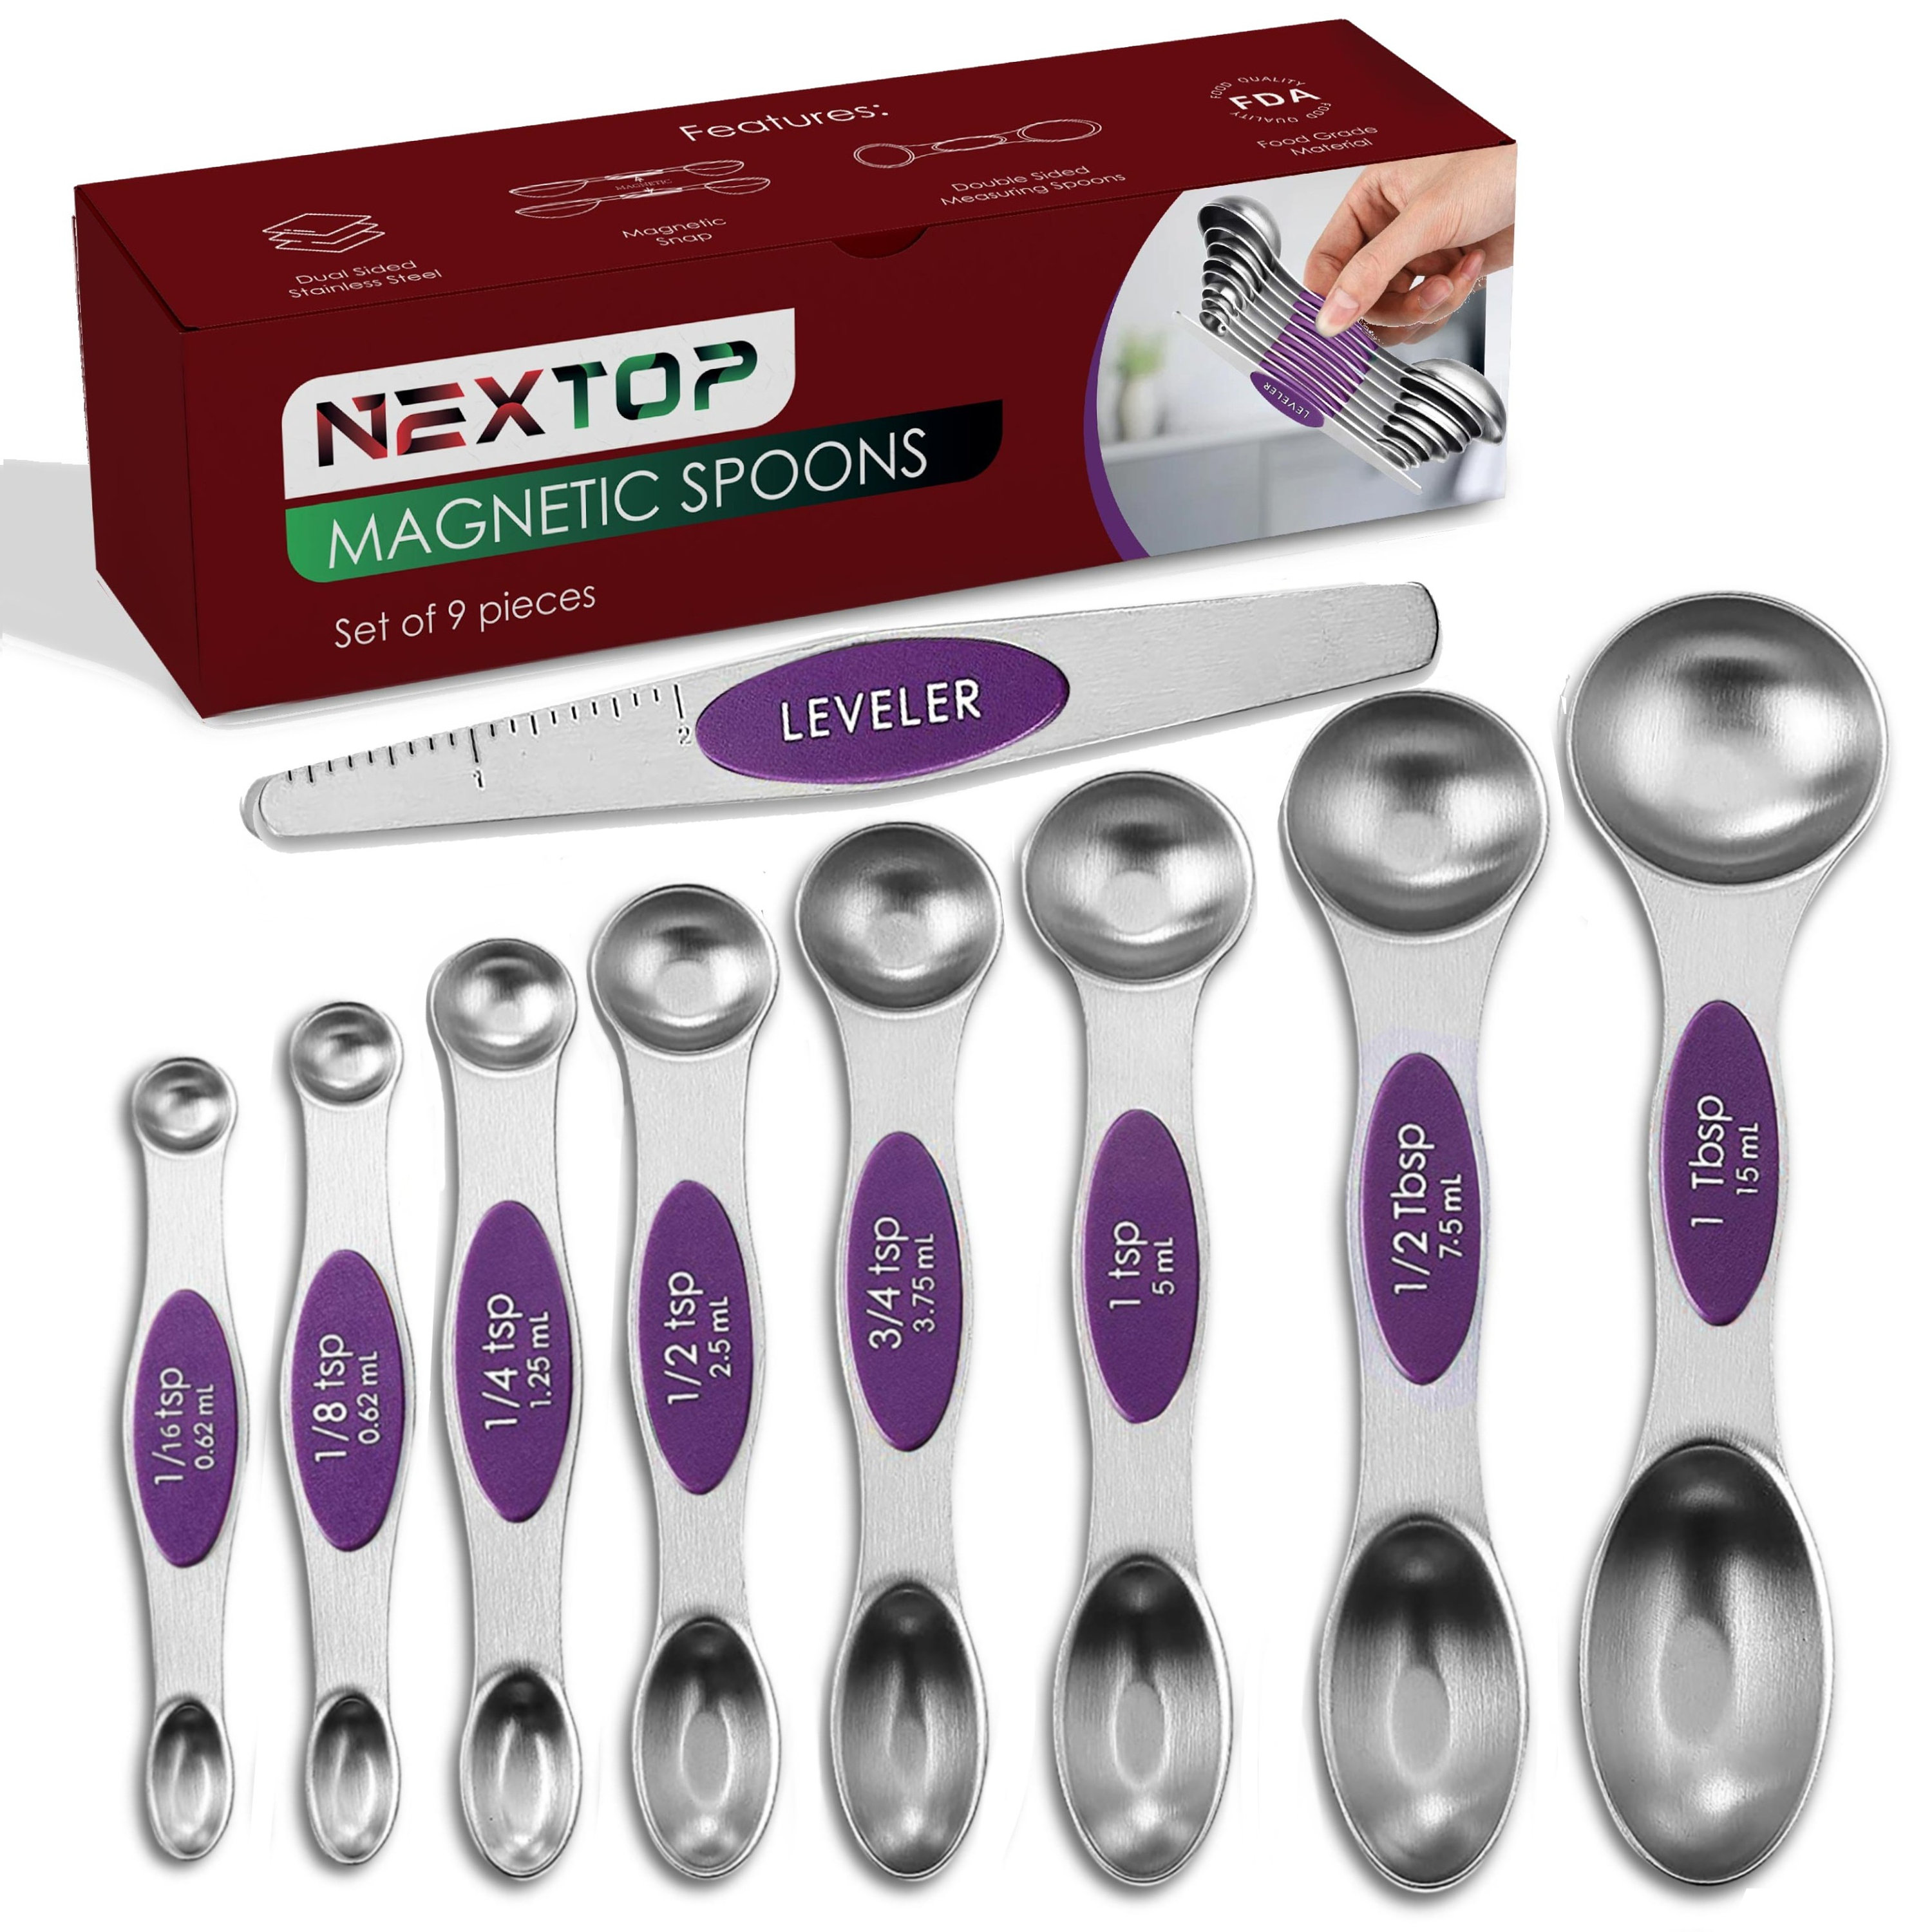 Magnetic Measuring Spoons Set, Stainless Steel Dual Sided Spoons